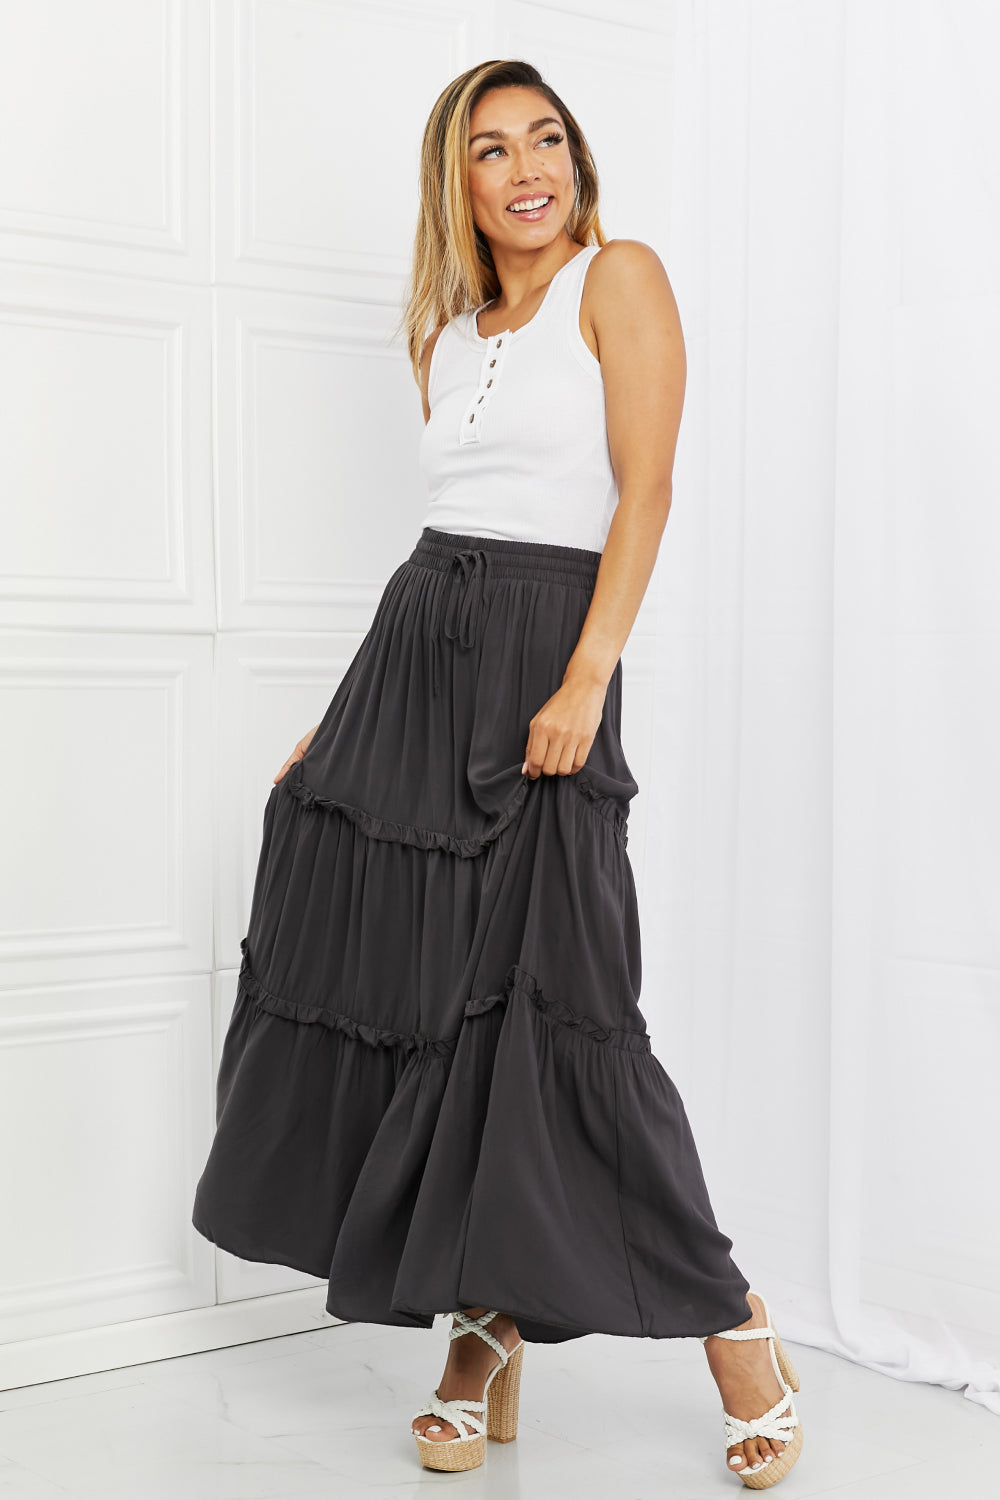 Zenana Summer Days Full Size Ruffled Maxi Skirt in Ash Grey - Coco and lulu boutique 